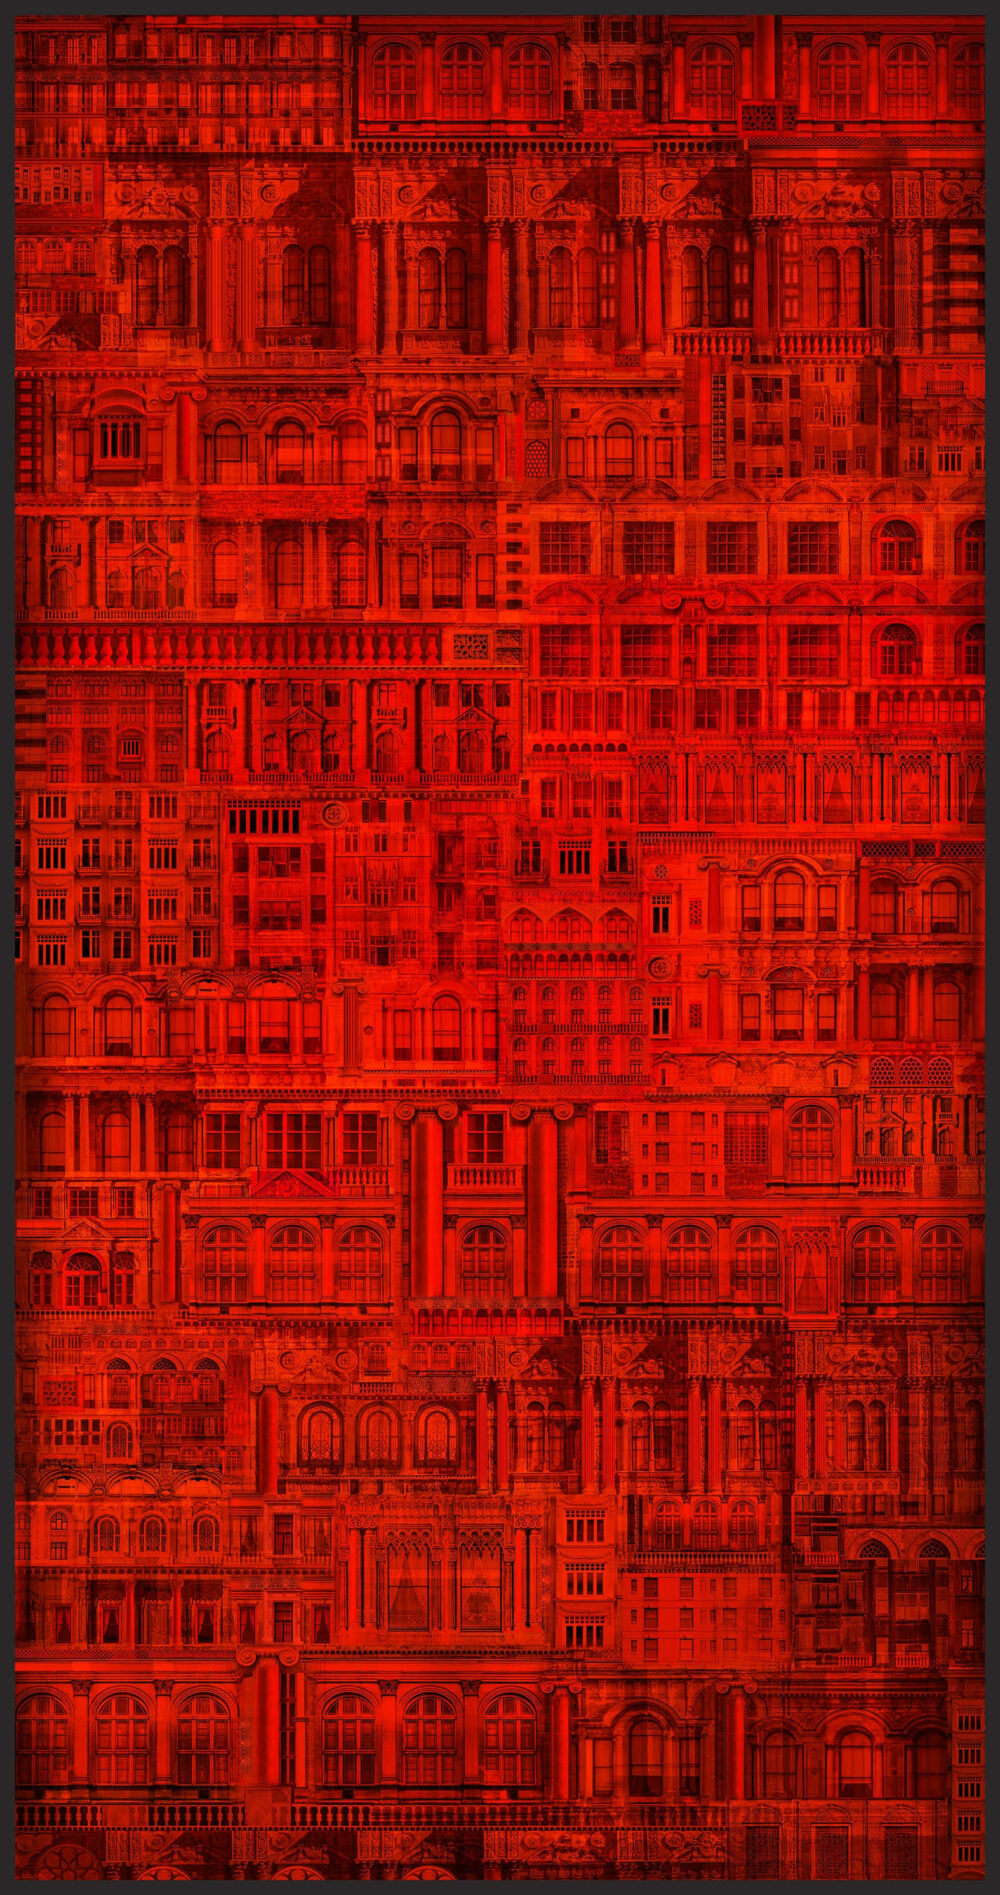 A large red and black print with rows and rows of building facades. Some look old, with decorative columns. Others look new, with archways.